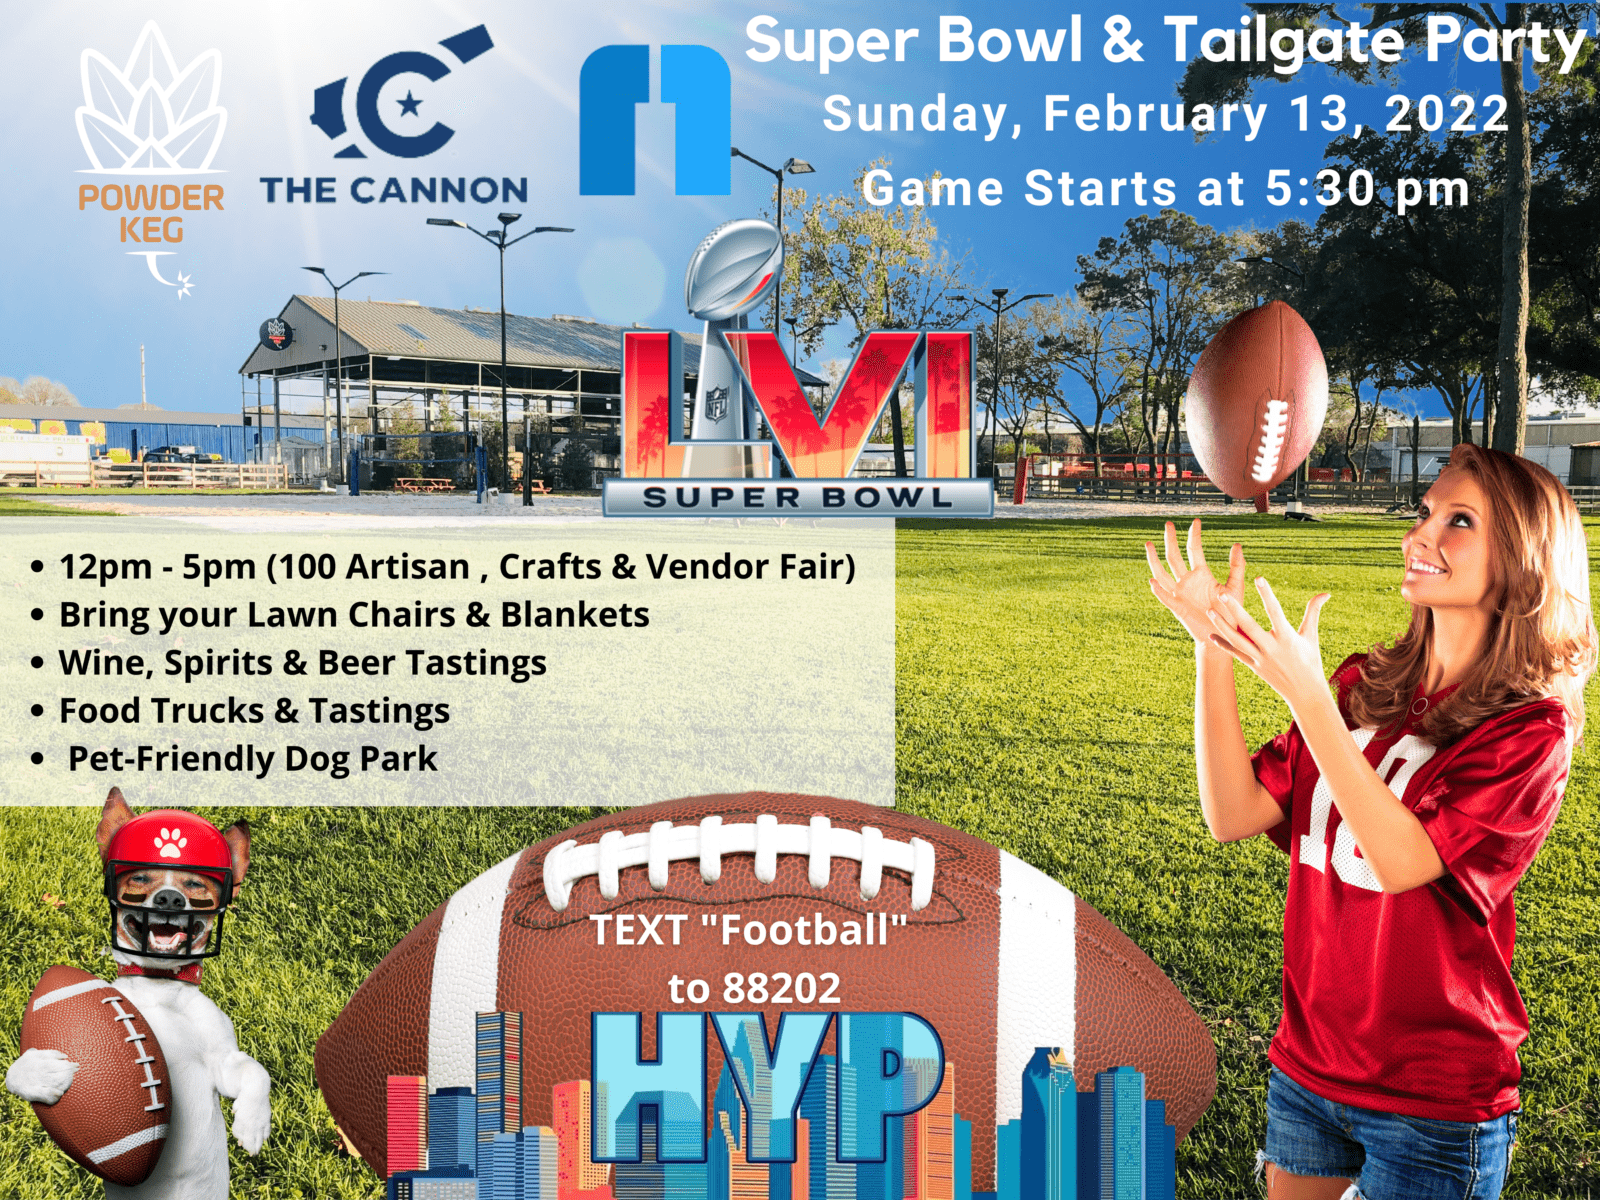 Super Bowl & Tailgate Party